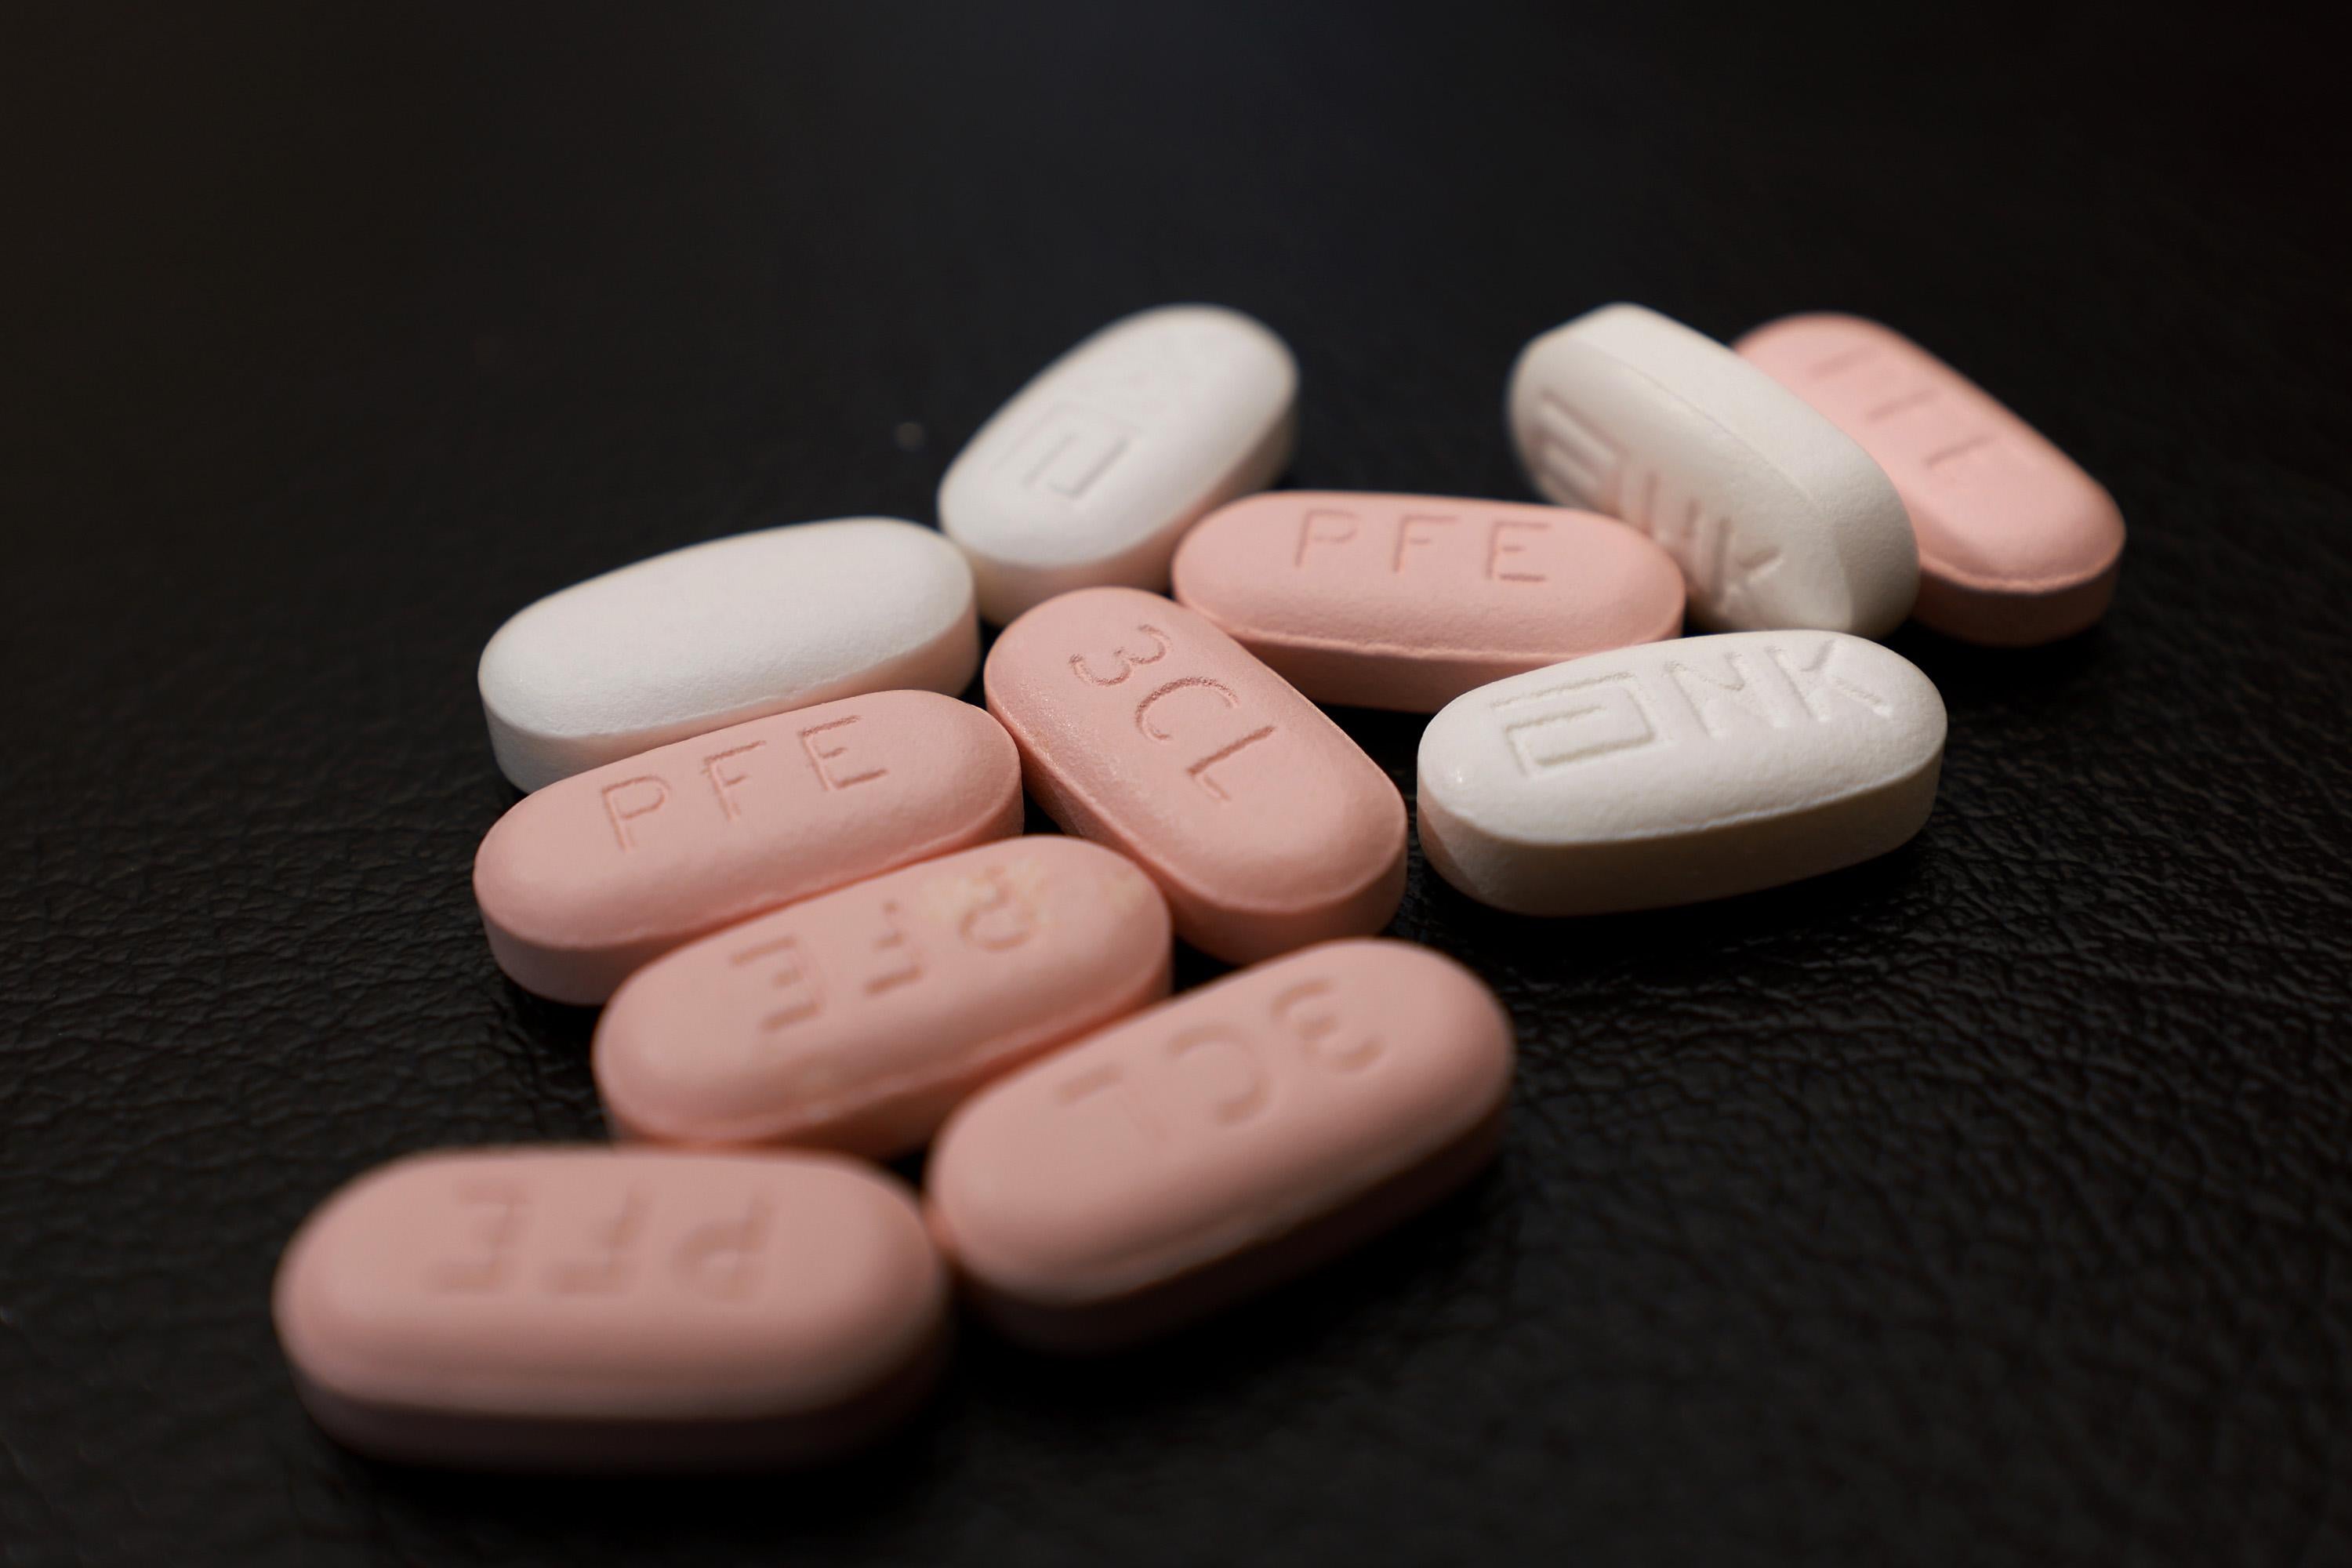 A bunch of pink pills, and white pills. They are long and oval-shaped, and look like they'd be a little tough to swallow. 